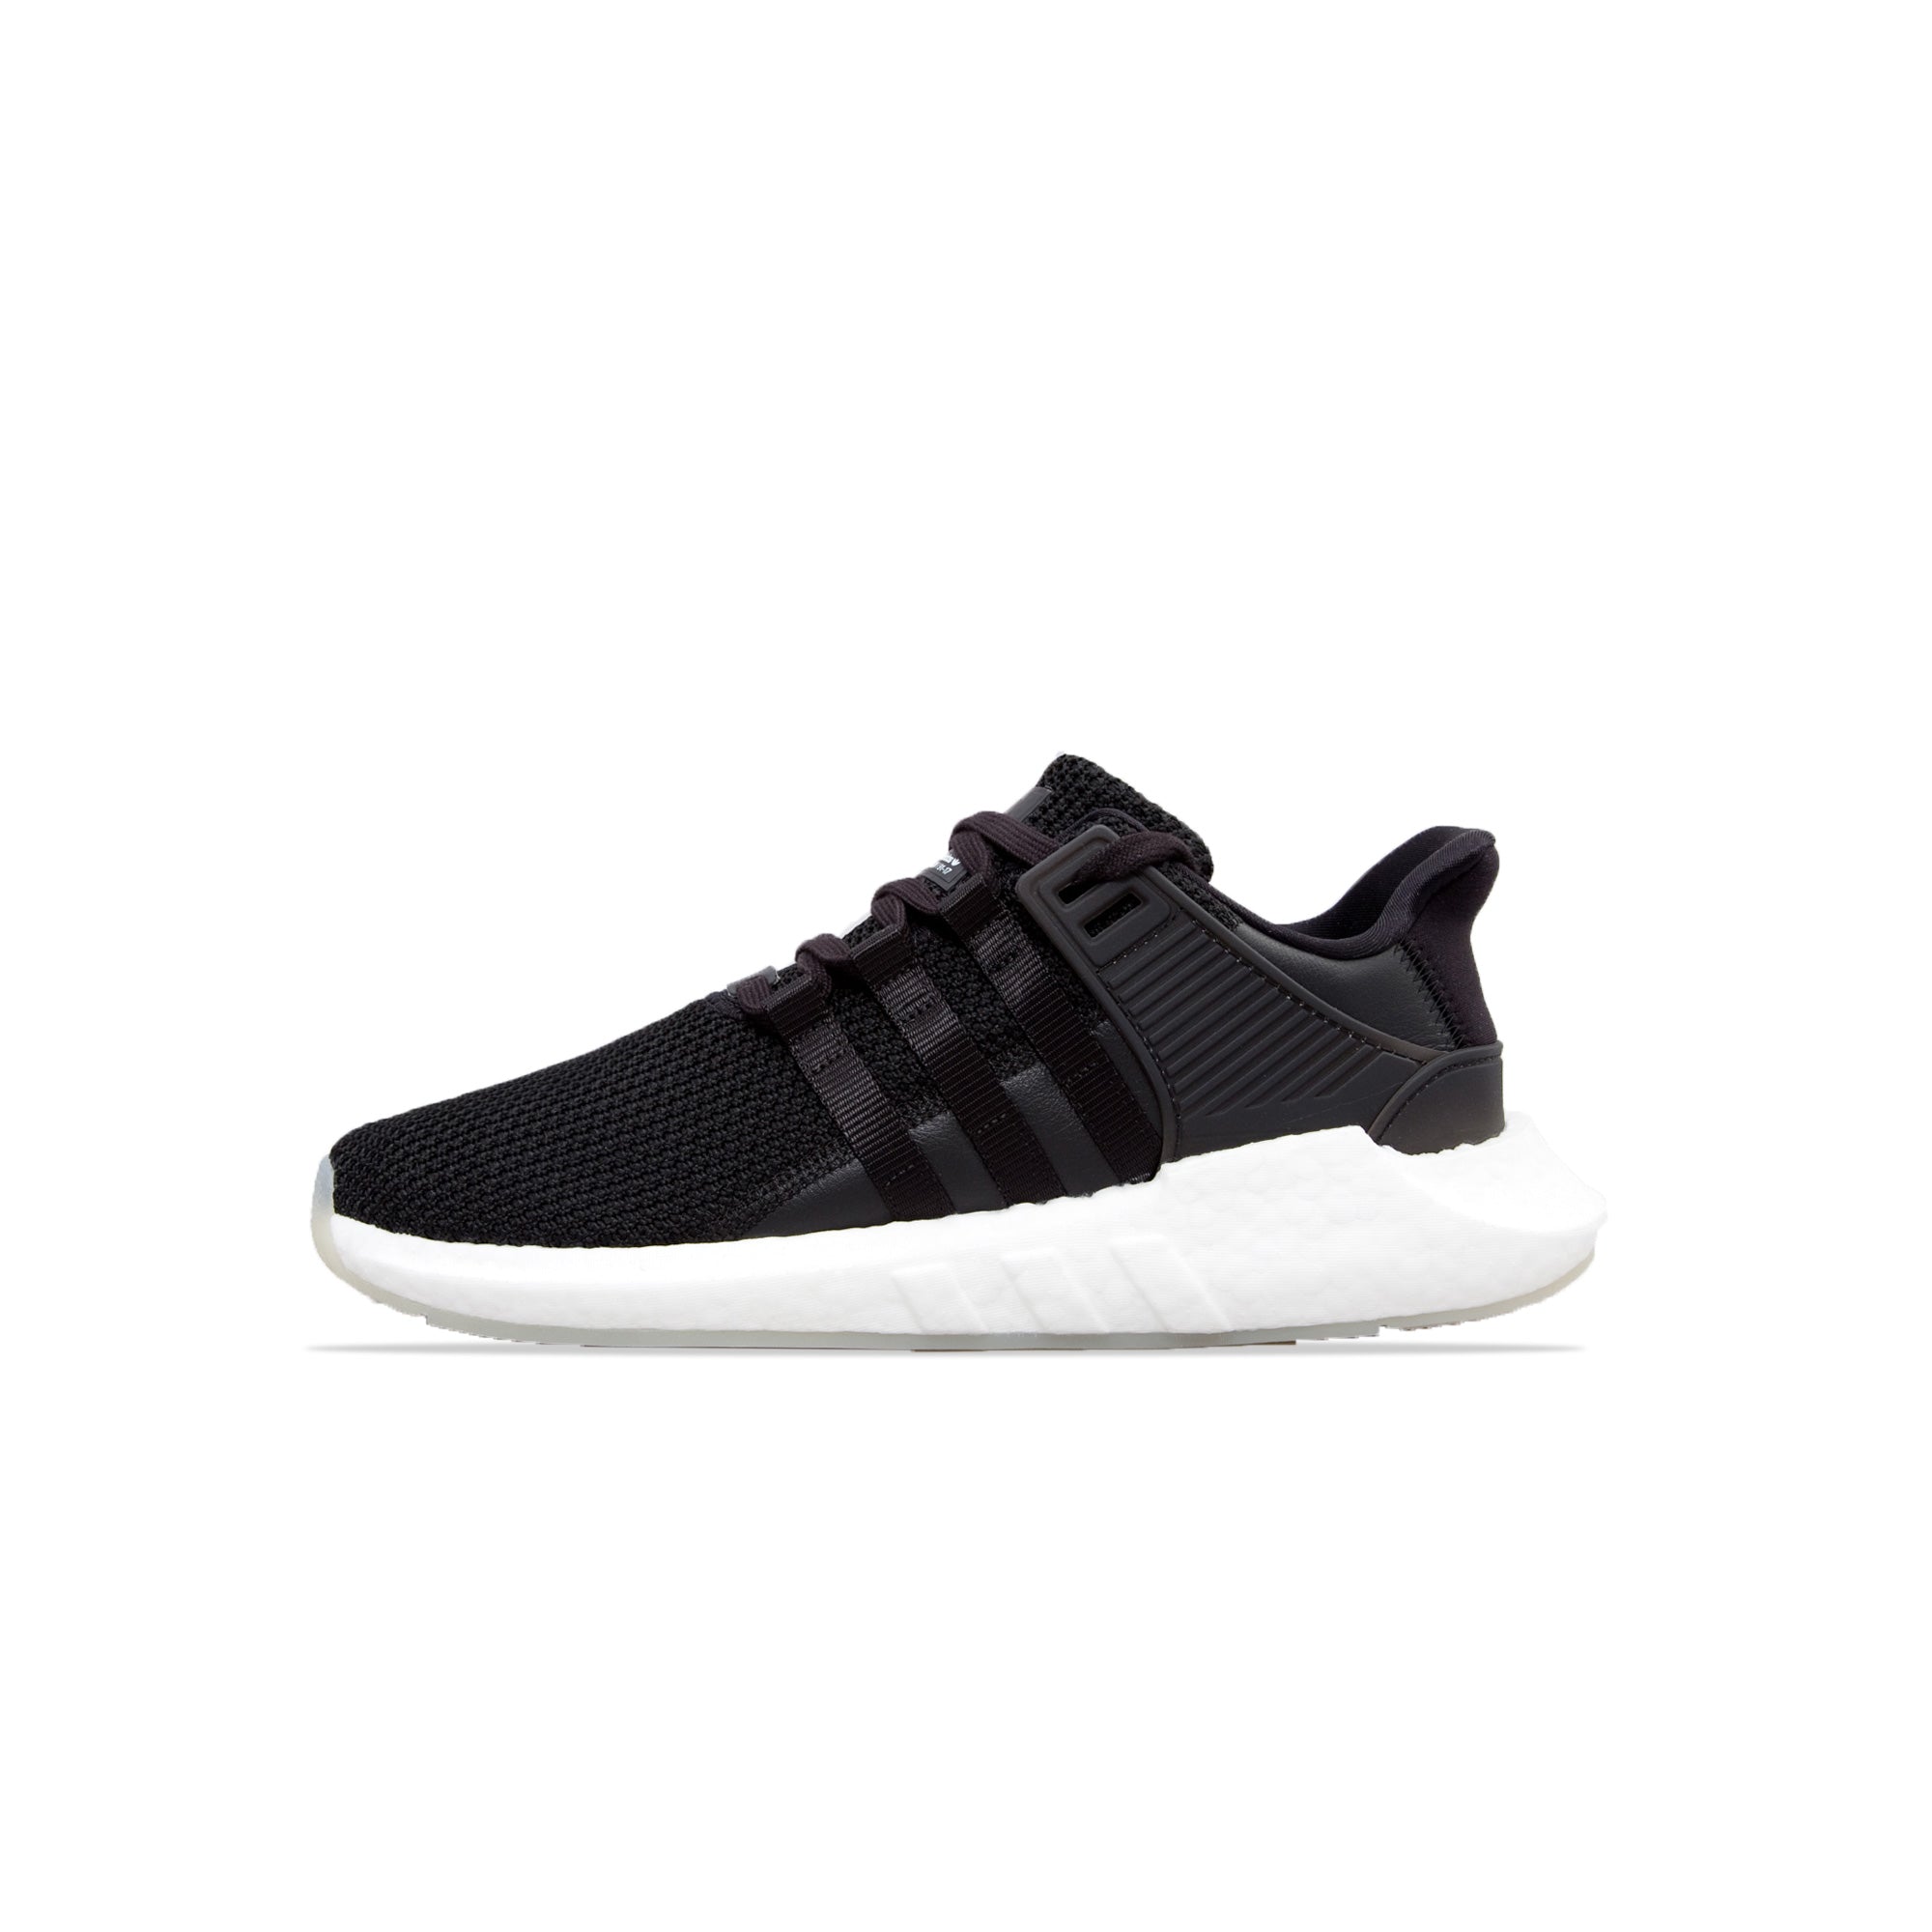 Adidas EQT Support 93/17 Boost Shoes [BZ0585]